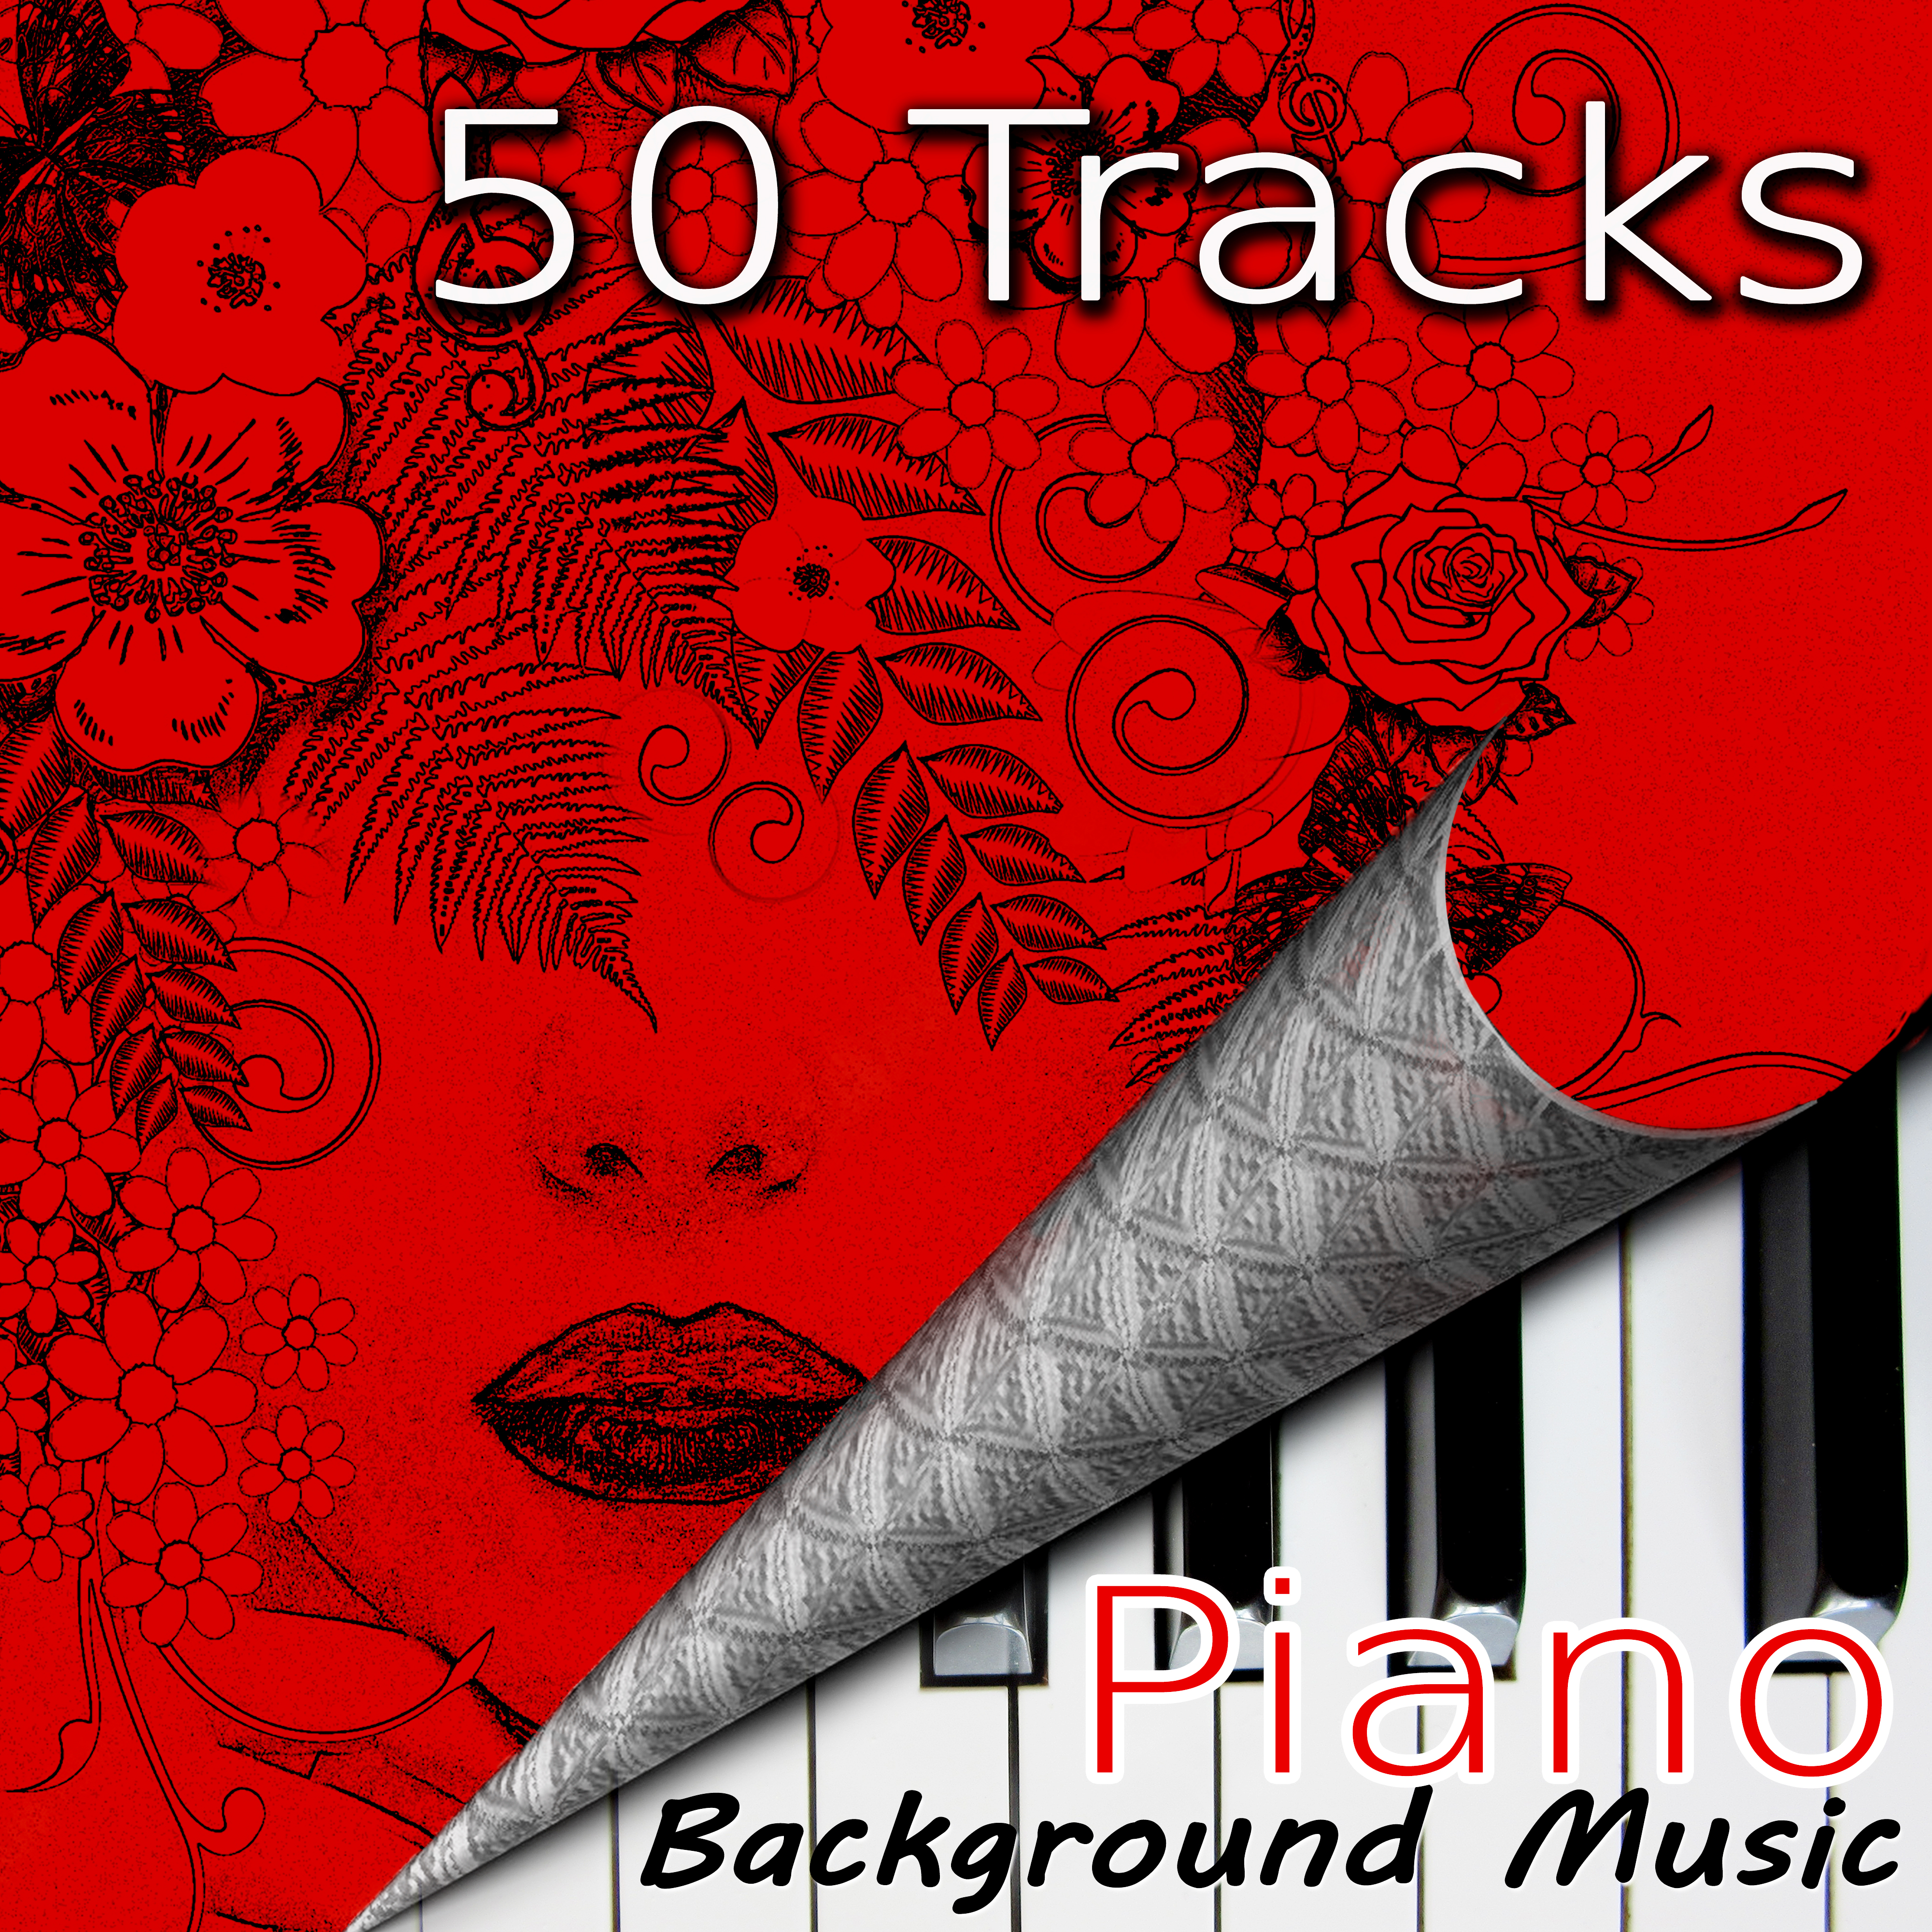 50 Tracks Piano Background Music  Easy Listening Video Music, Elevator Music, Office Music,  Music, Love Making, Cocktail Bar, Smooth Jazz